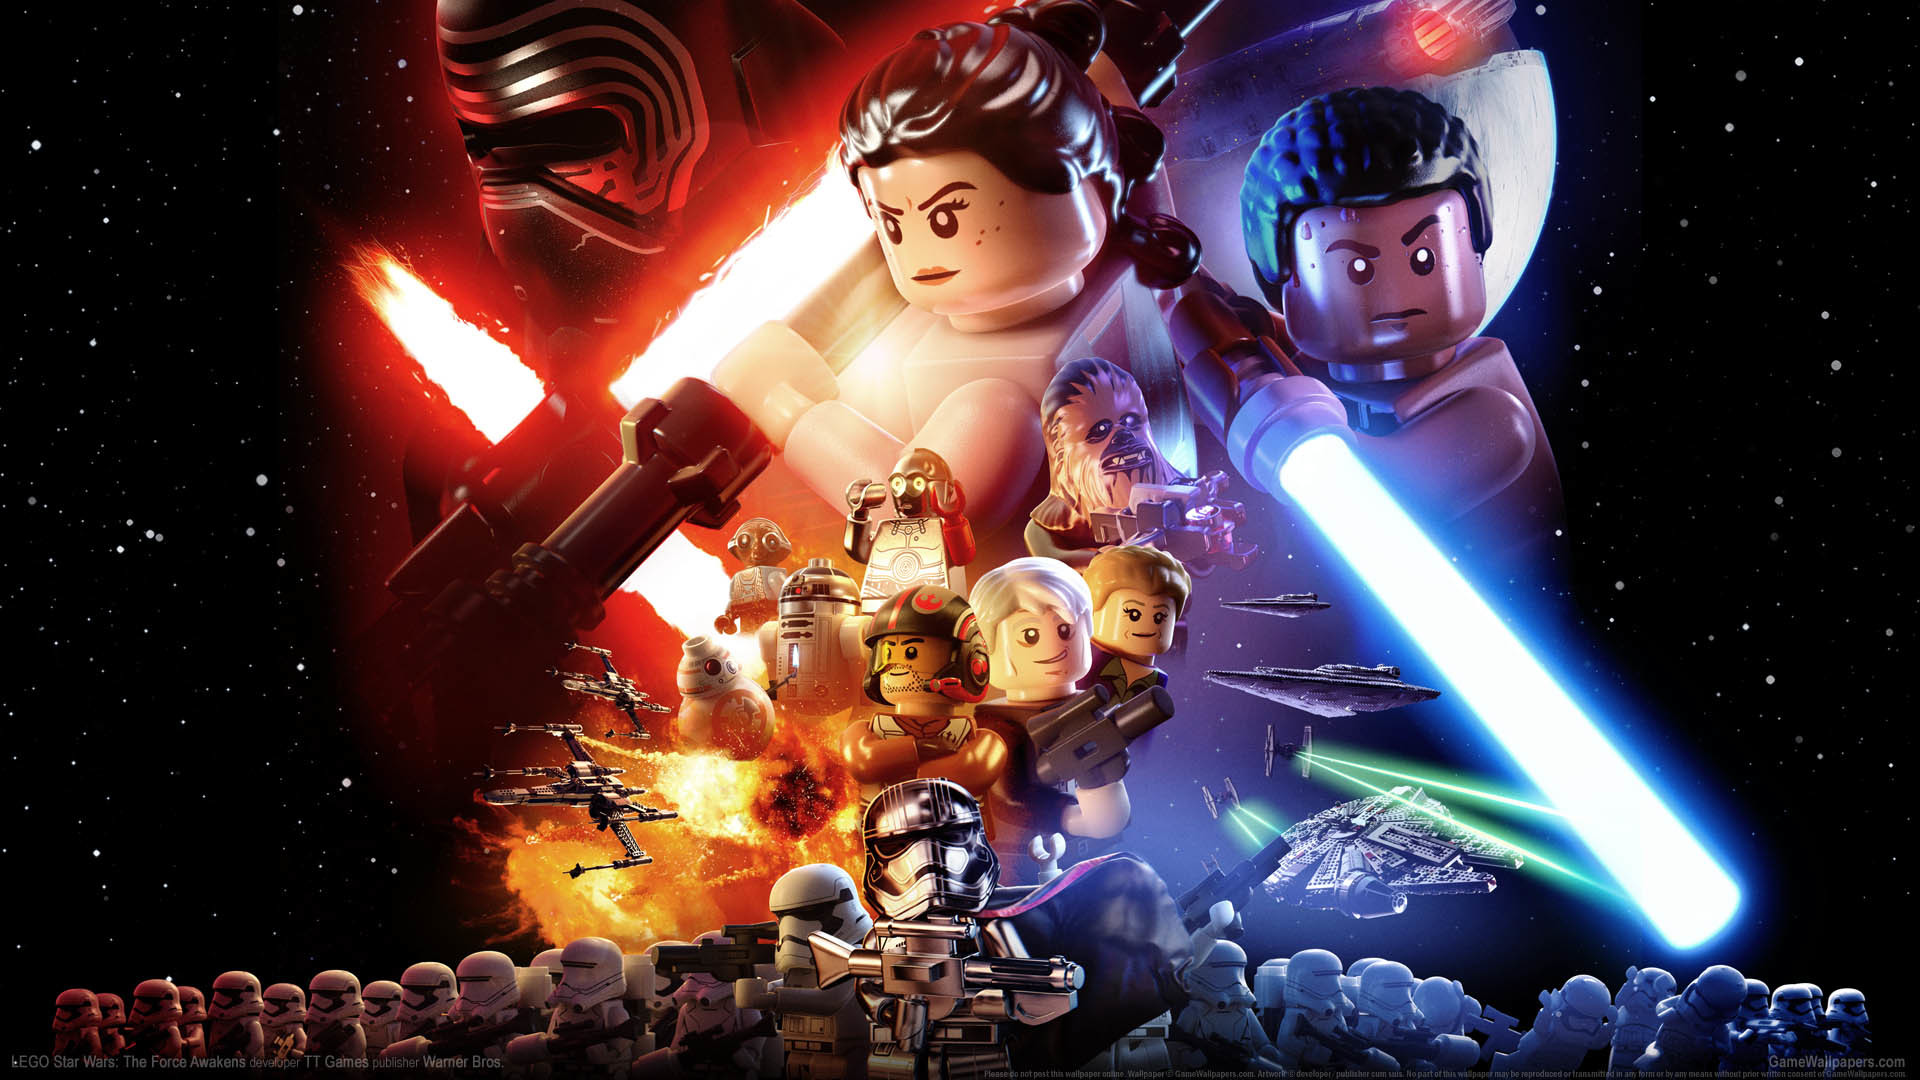 1920x1080 ... LEGO Star Wars: The Force Awakens wallpaper or background 01